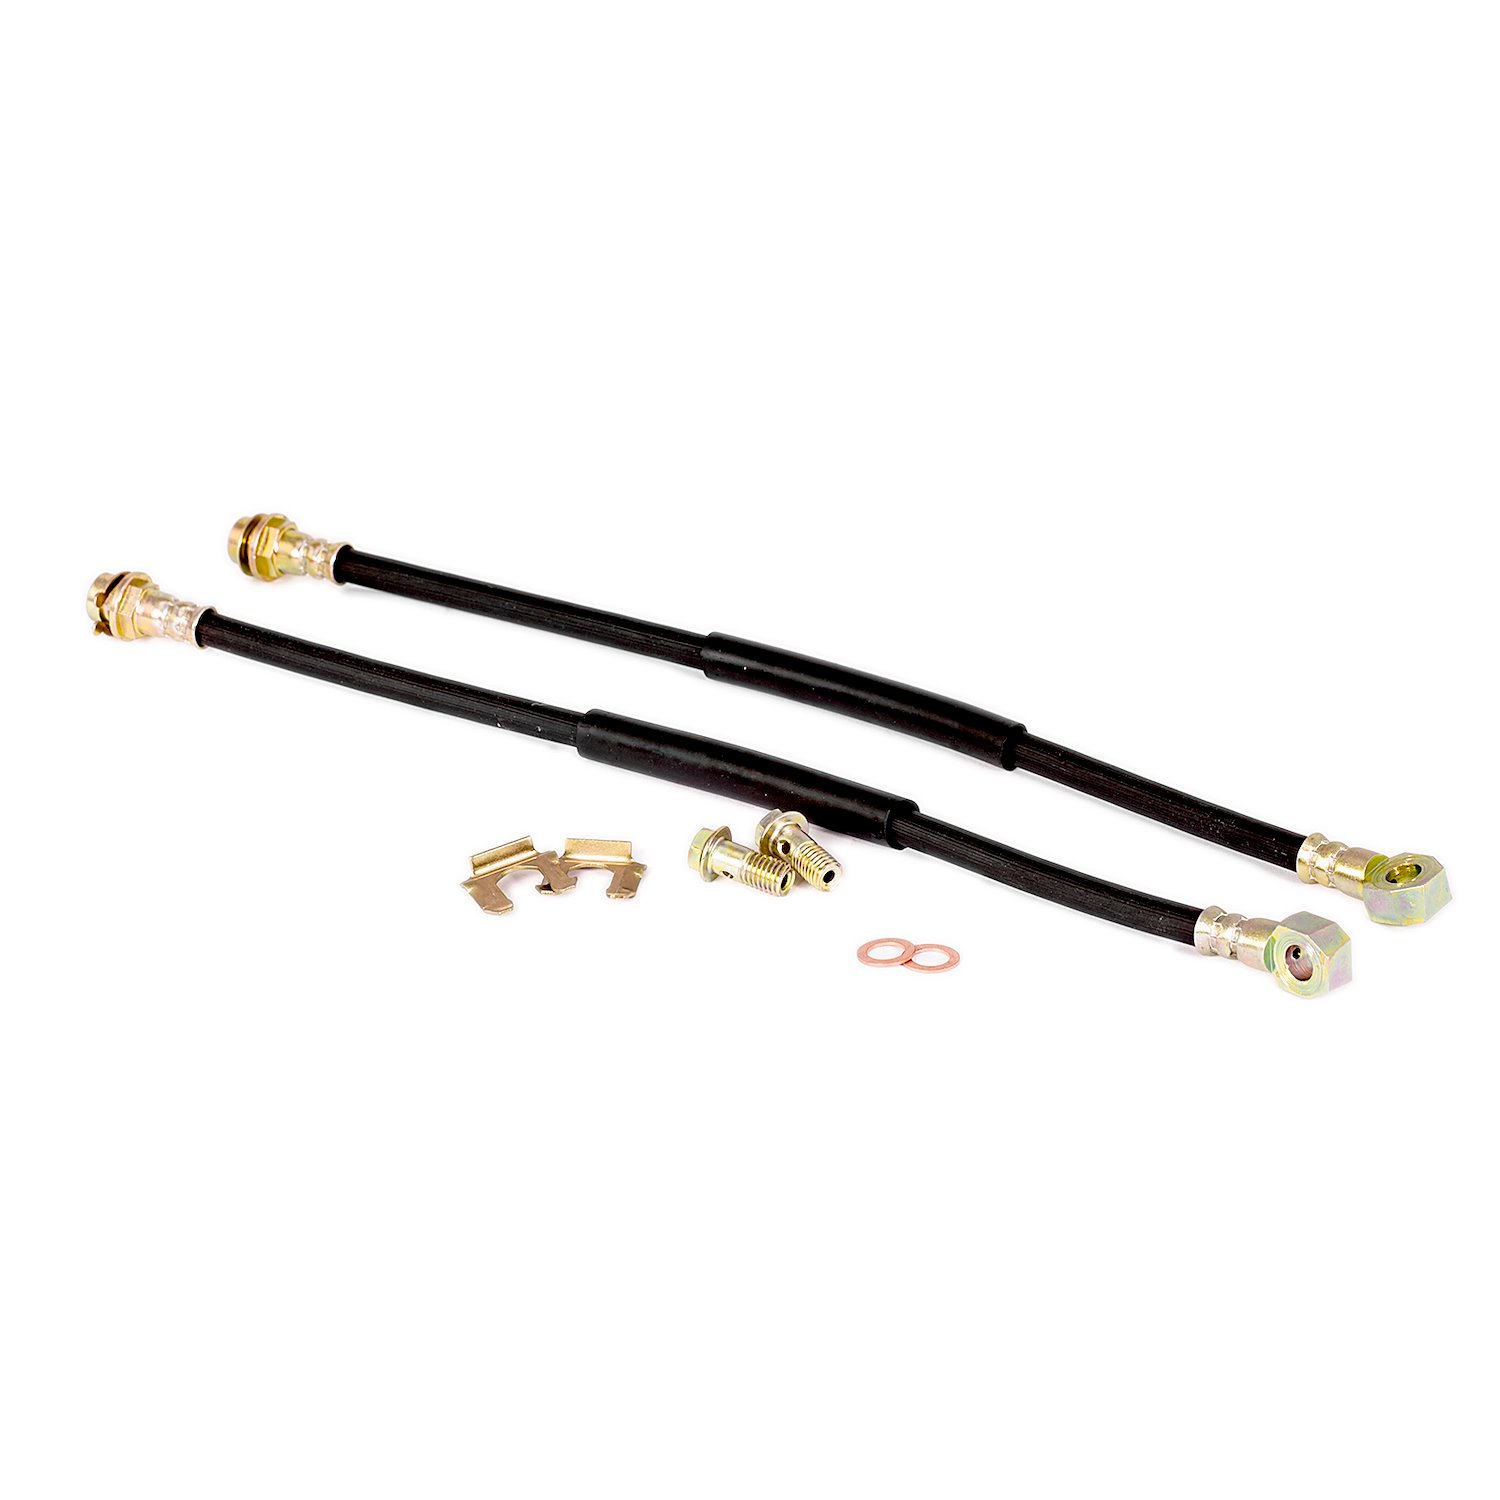 10mm Banjo 18 Long Rubber Brake Lines with